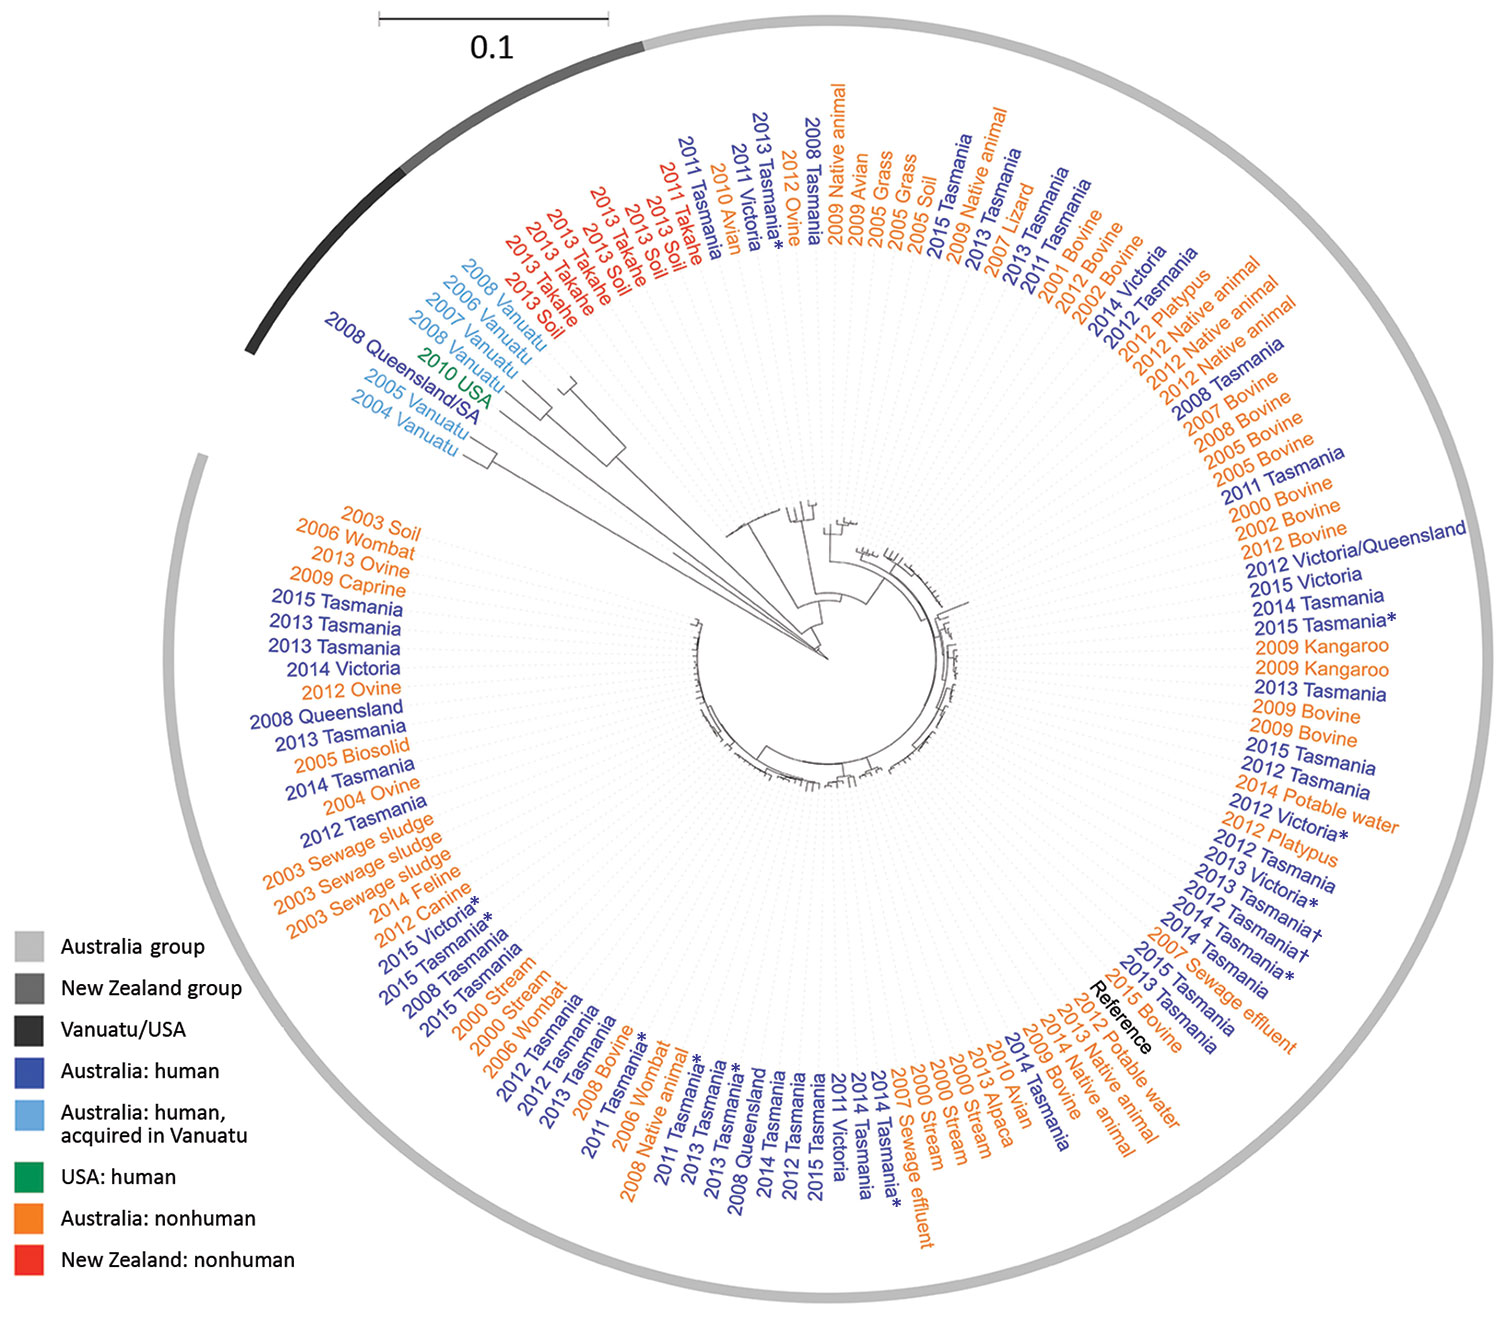 Maximum-likelihood phylogeny of 132 sequenced Salmonella enterica serovar Mississippi isolates from Australia and New Zealand and reference isolates, inferred from 8,573 core single-nucleotide polymorphisms. Nodes are labeled with isolation year, isolate source if nonhuman (all from Tasmania), and Australia state of acquisition or residence if human. Tree visualized with iTOL (https://itol.embl.de) and midpoint rooted. Scale bar indicates nucleotide substitutions per site. *State of residence wa